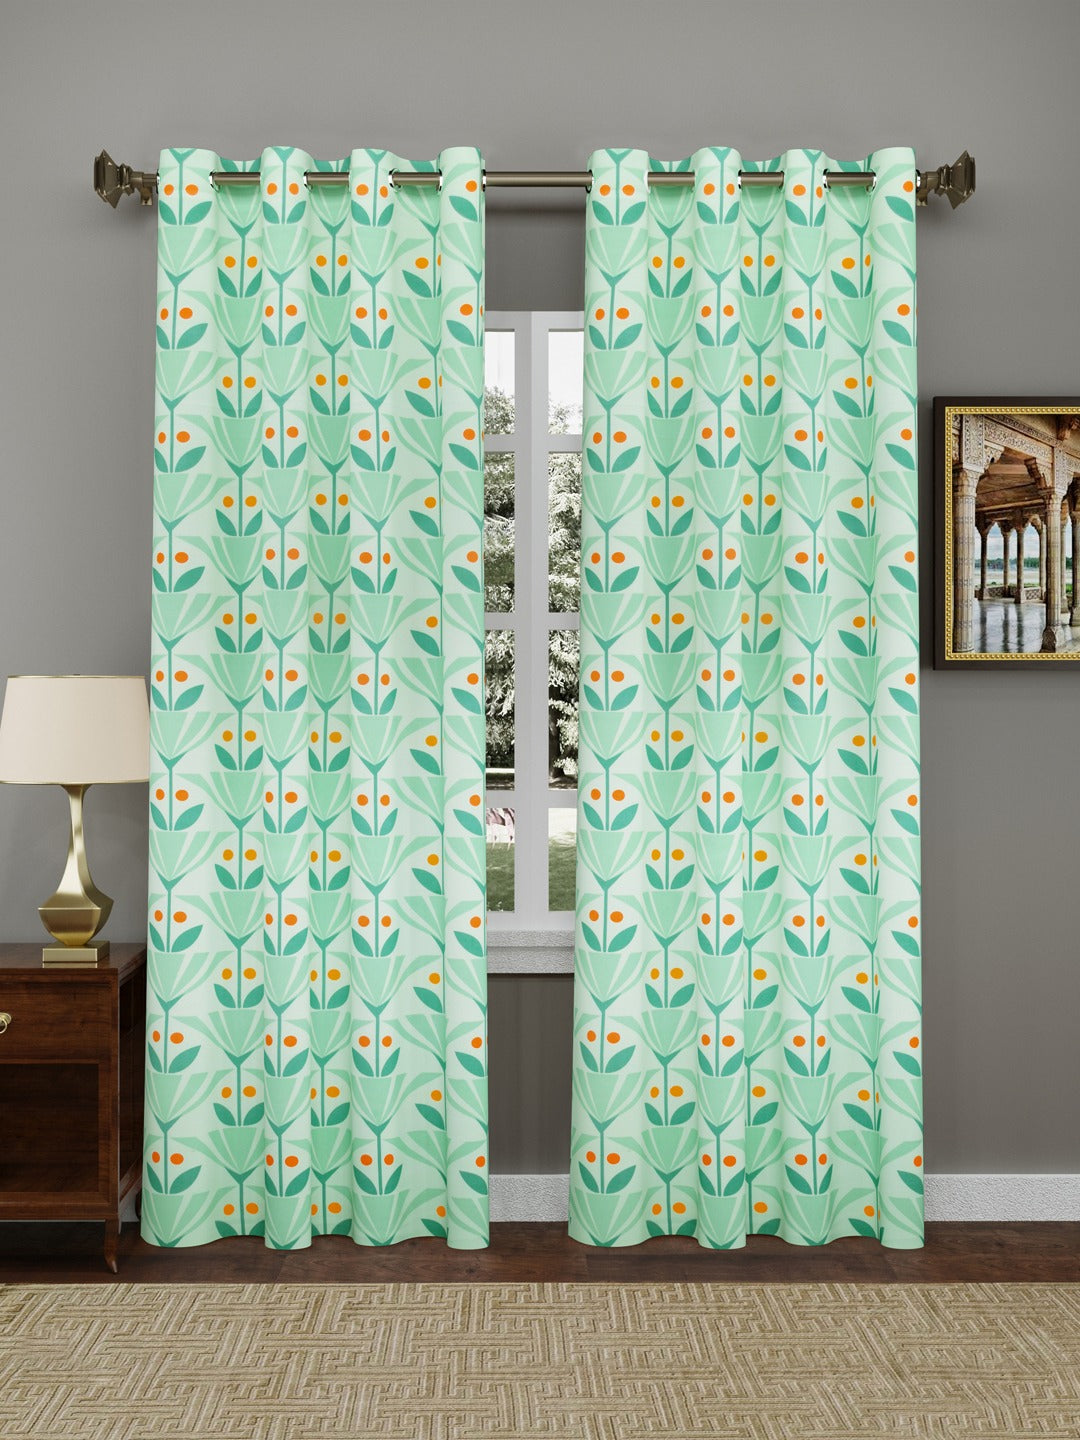 Kids Room Cotton Printed Curtains - Set of 2 - 7X4 feet